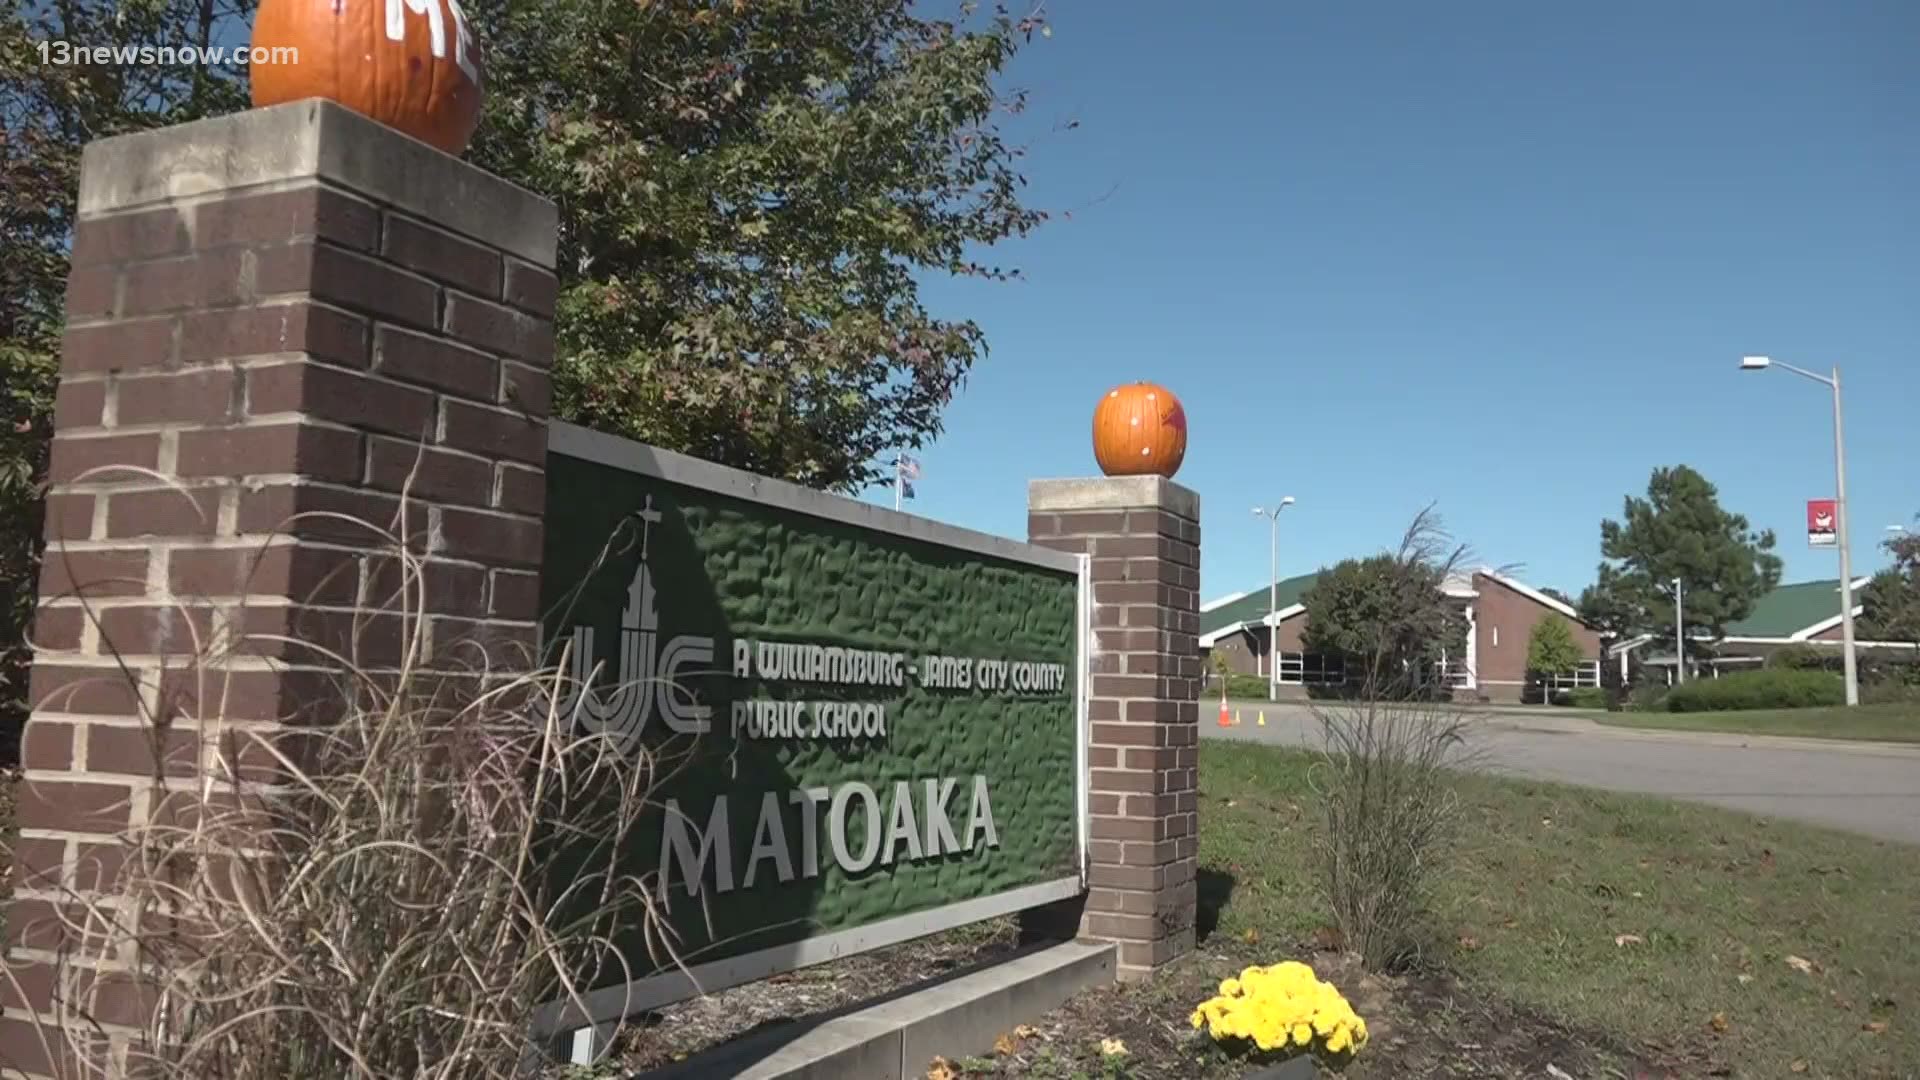 Voters will head to Matoaka Elementary School on Tuesday to cast their ballot. But recently, three people there tested positive for coronavirus.